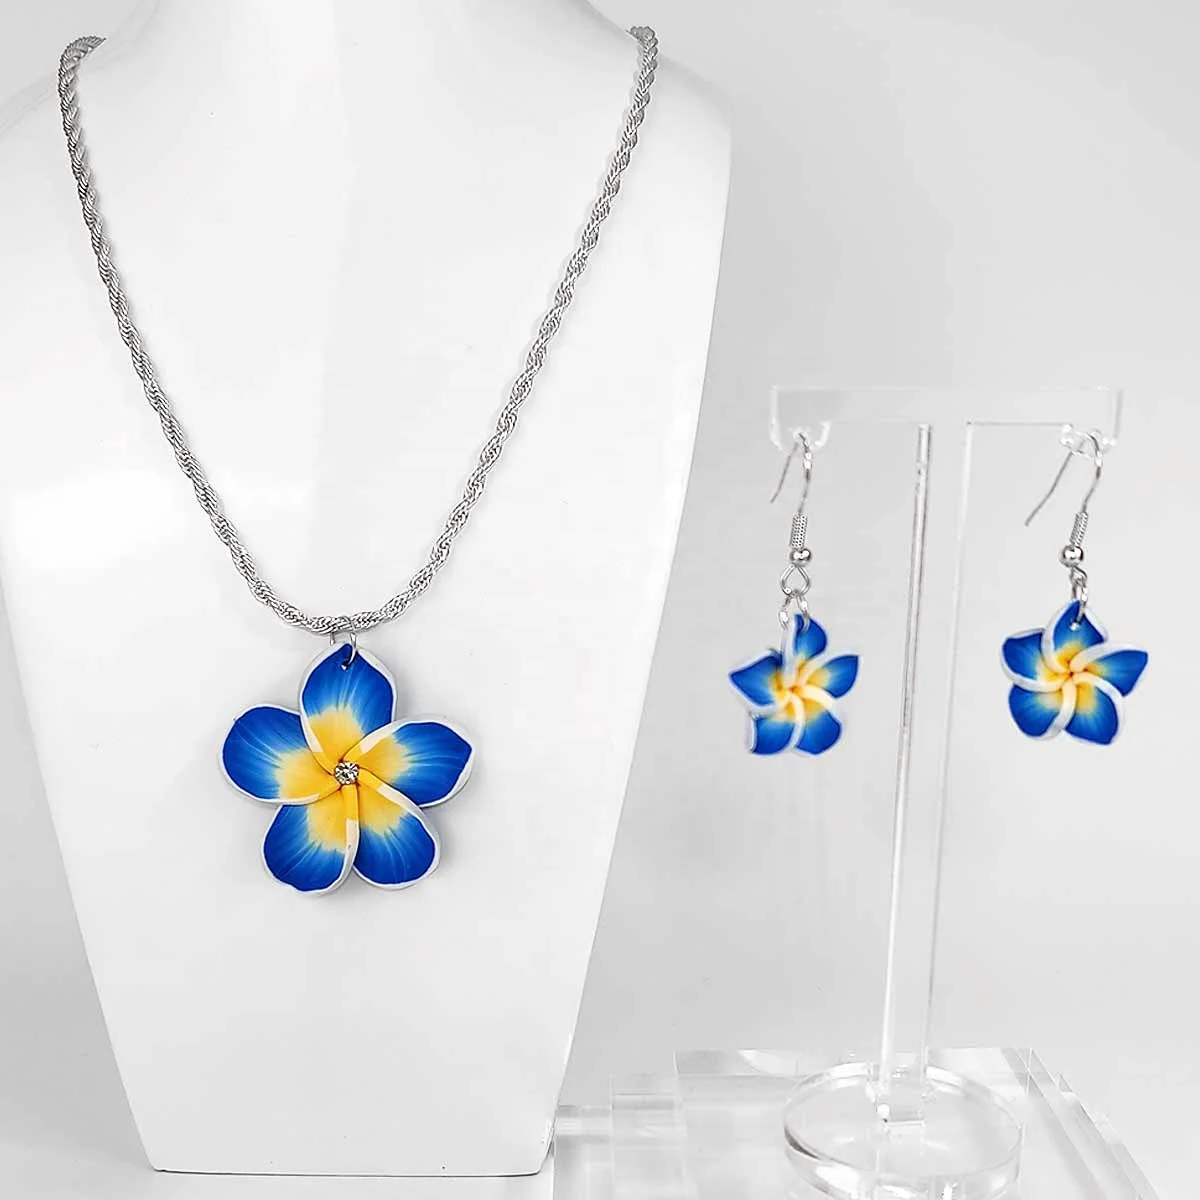 

shuiin polymer clay plumeria flower earrings and necklace sets with 3mm silver rope chain polynesian hawaiian jewelry wholesale